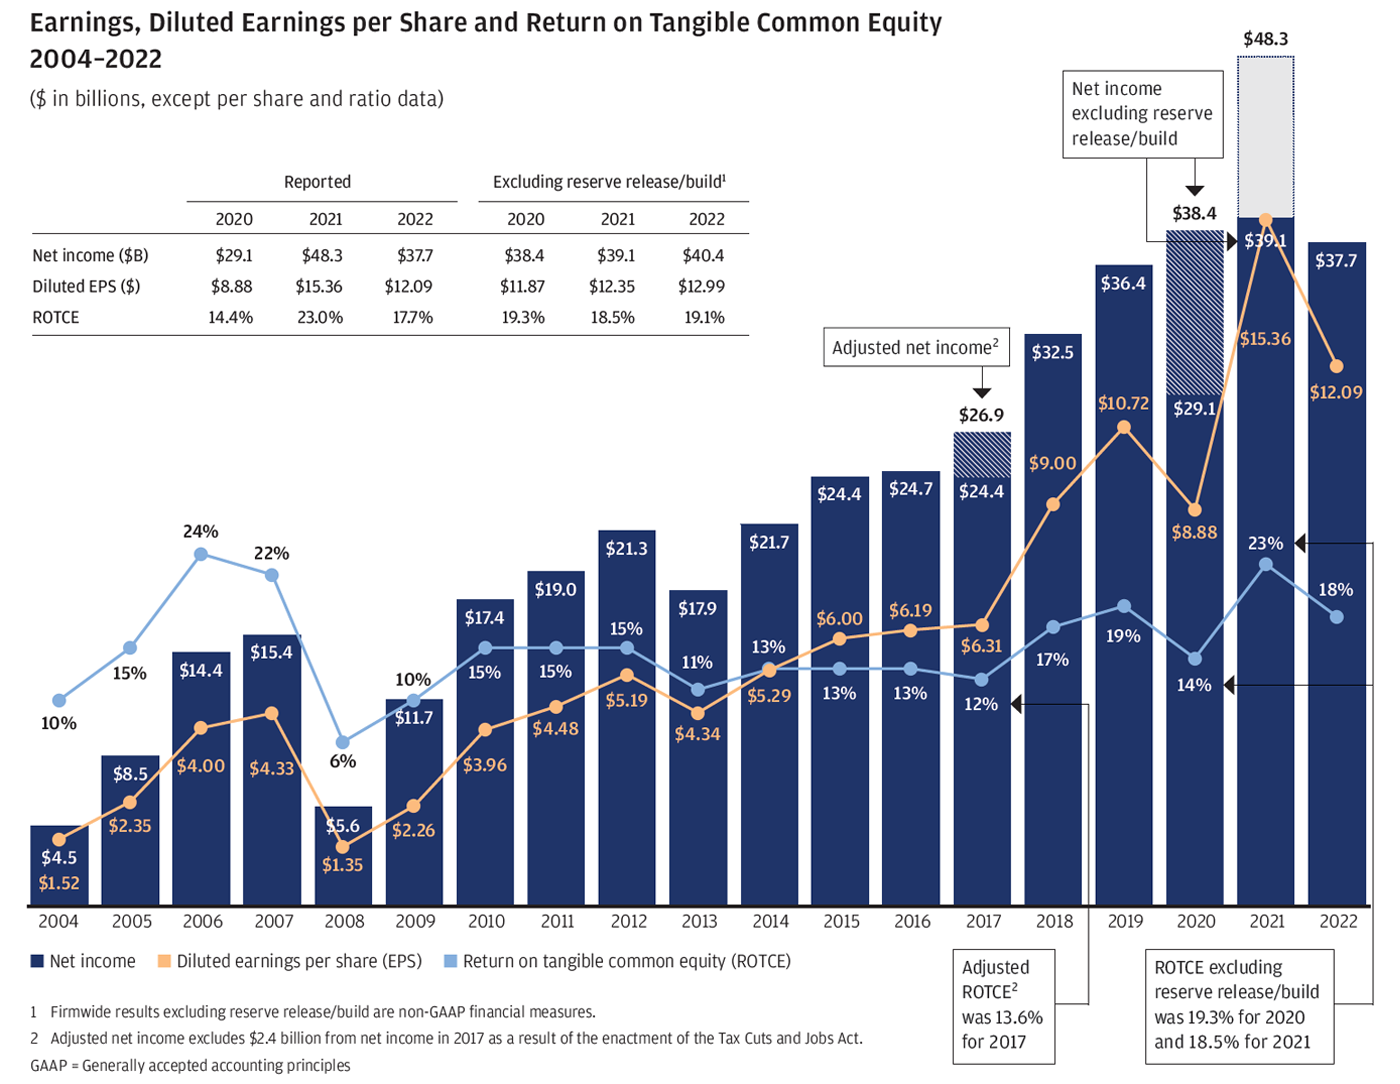 Earnings, diluted earnings per share and return on tangible common equity 2004-2022, Footnote 1 Firmwide results excluding reserve release/build are non-GAAP financial measures & Footnote 2 Adjusted net income excludes $2.4 billion from net income in 2017 as a result of the enactment of the Tax Cuts and Jobs Act. GAAP = Generally accepted accounting principles